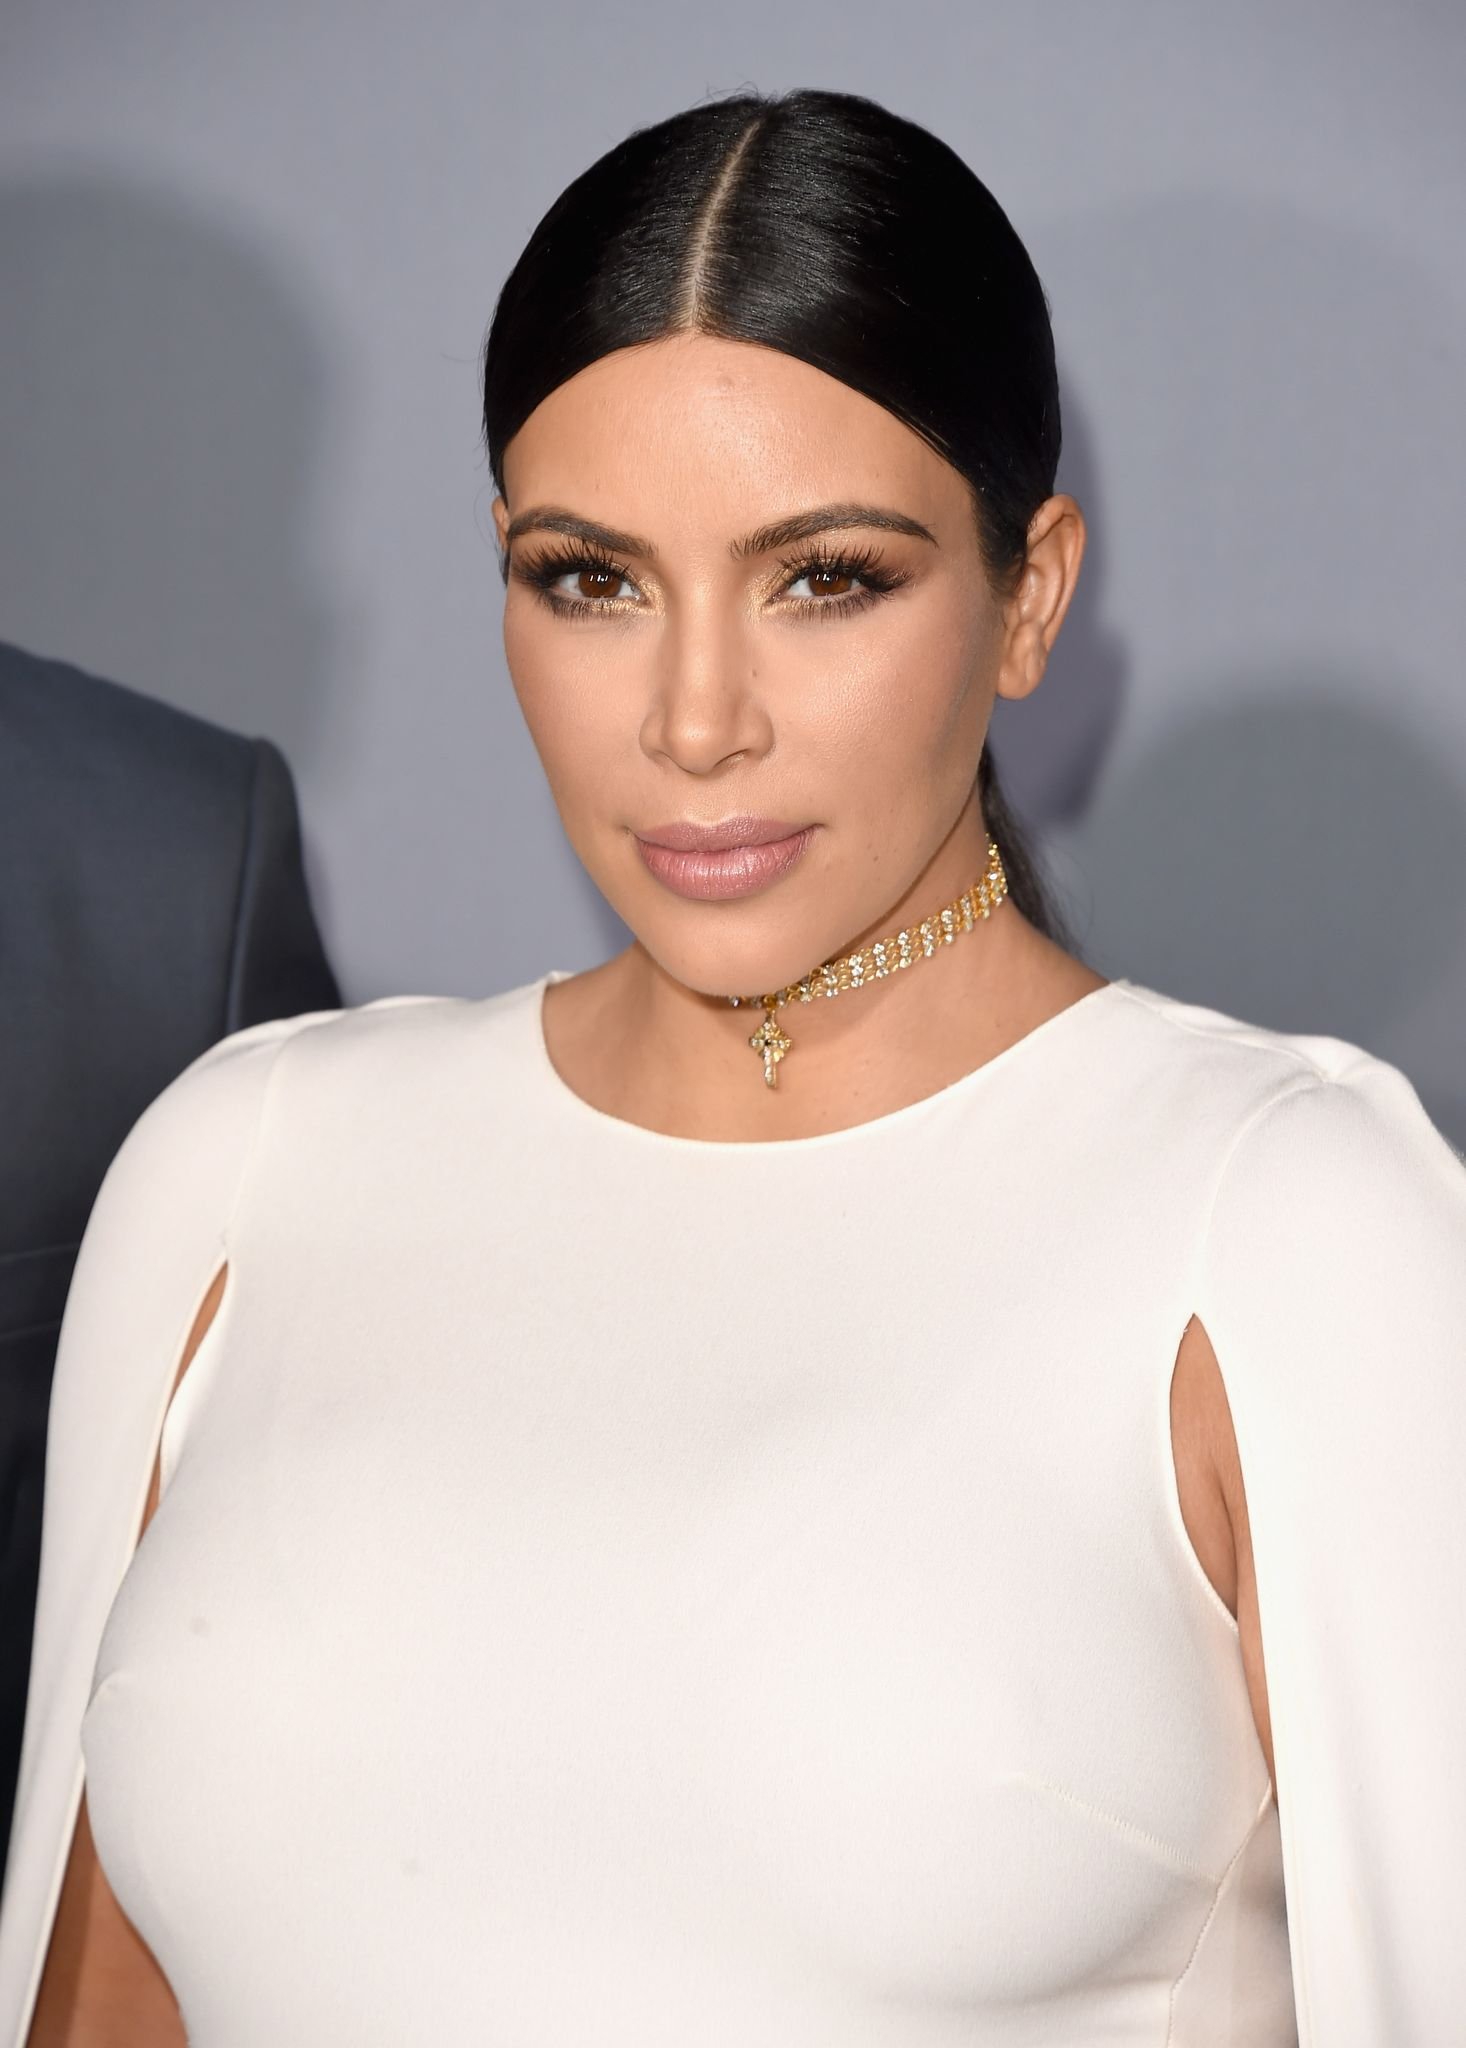 Television personality Kim Kardashian attends the InStyle Awards at Getty Center on October 26, 2015 in Los Angeles, California. | Photo: Getty Images